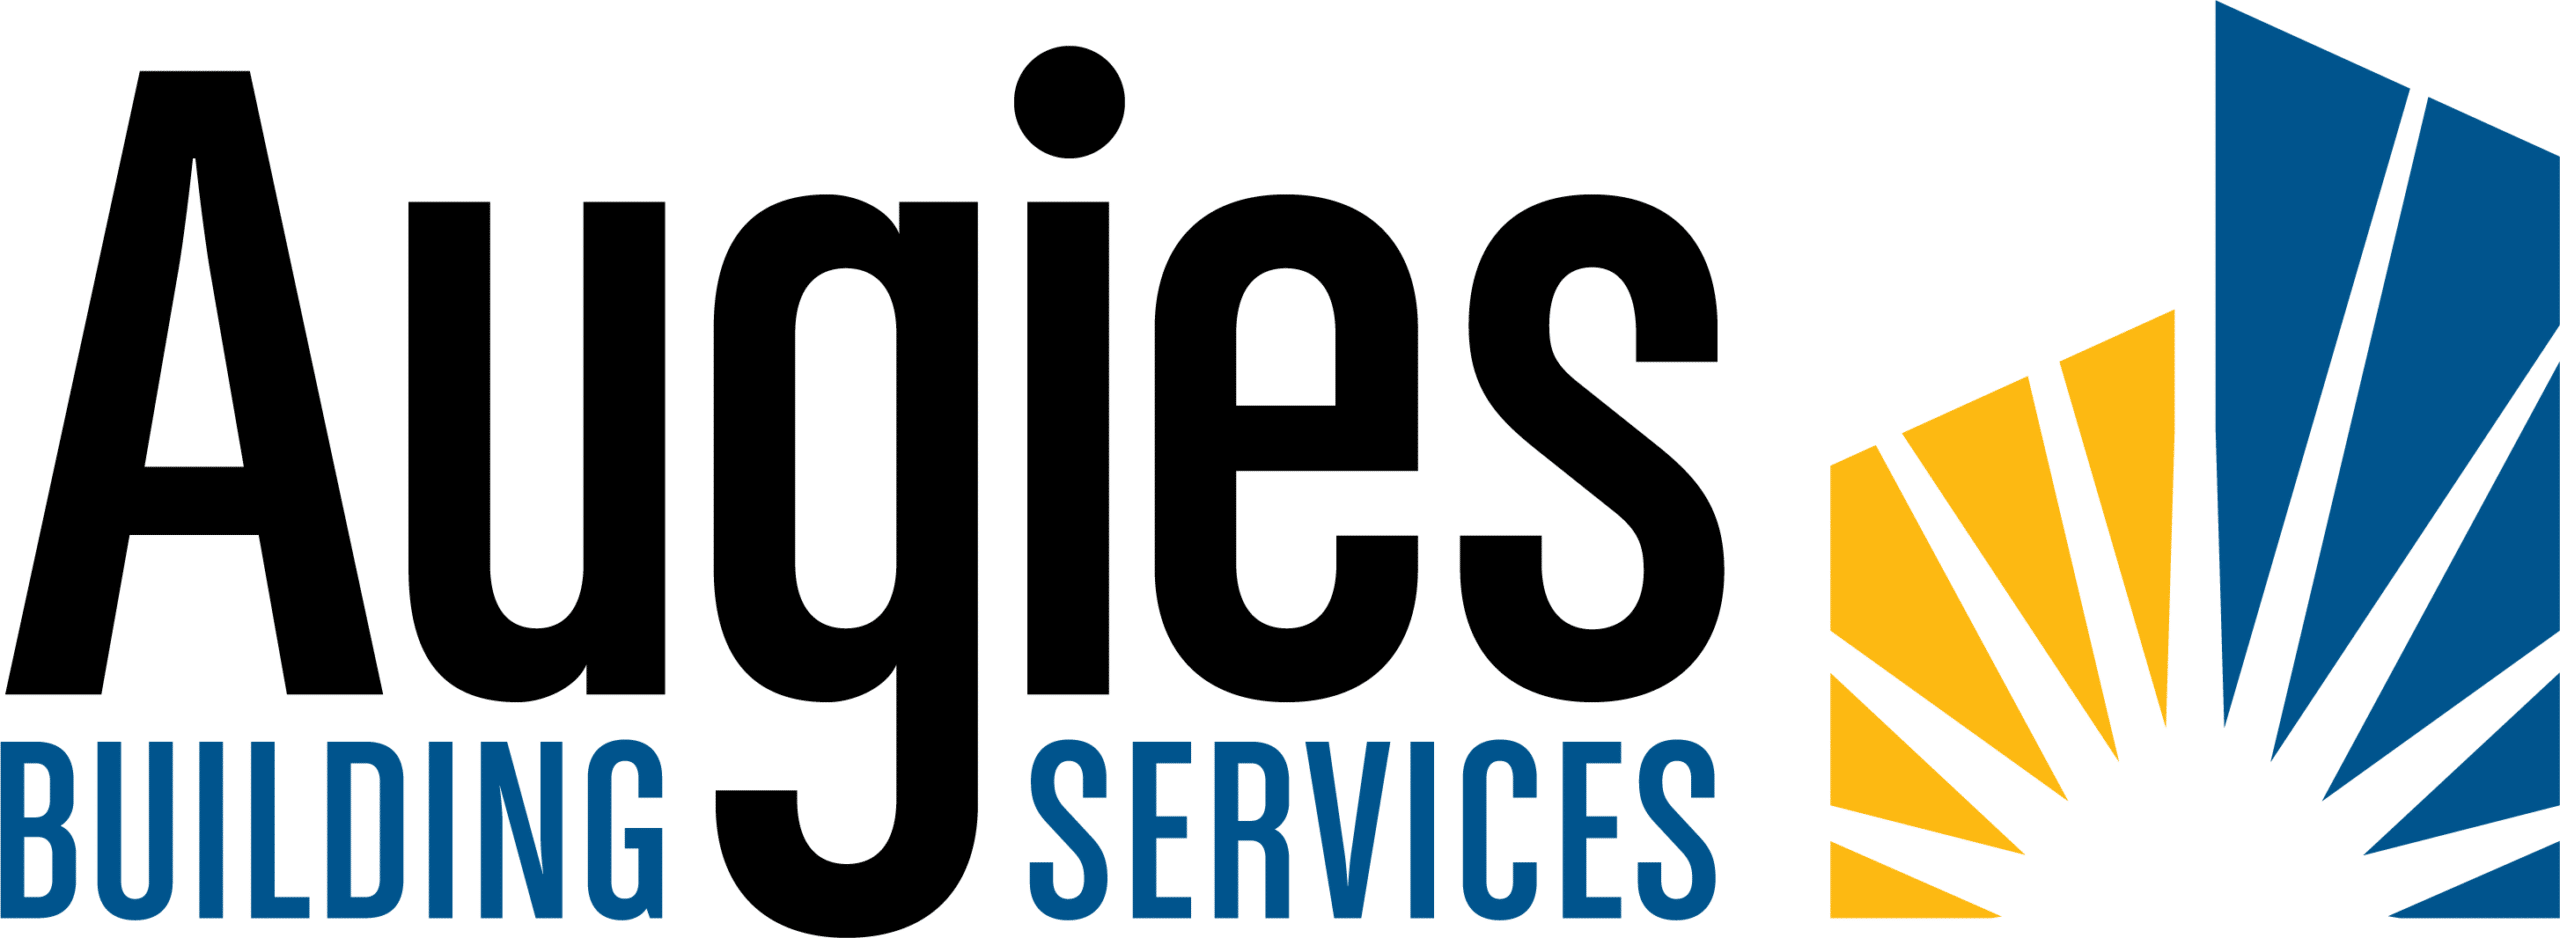 Sponsorship - Christian Business Round Table | Augies Janitorial Services : 